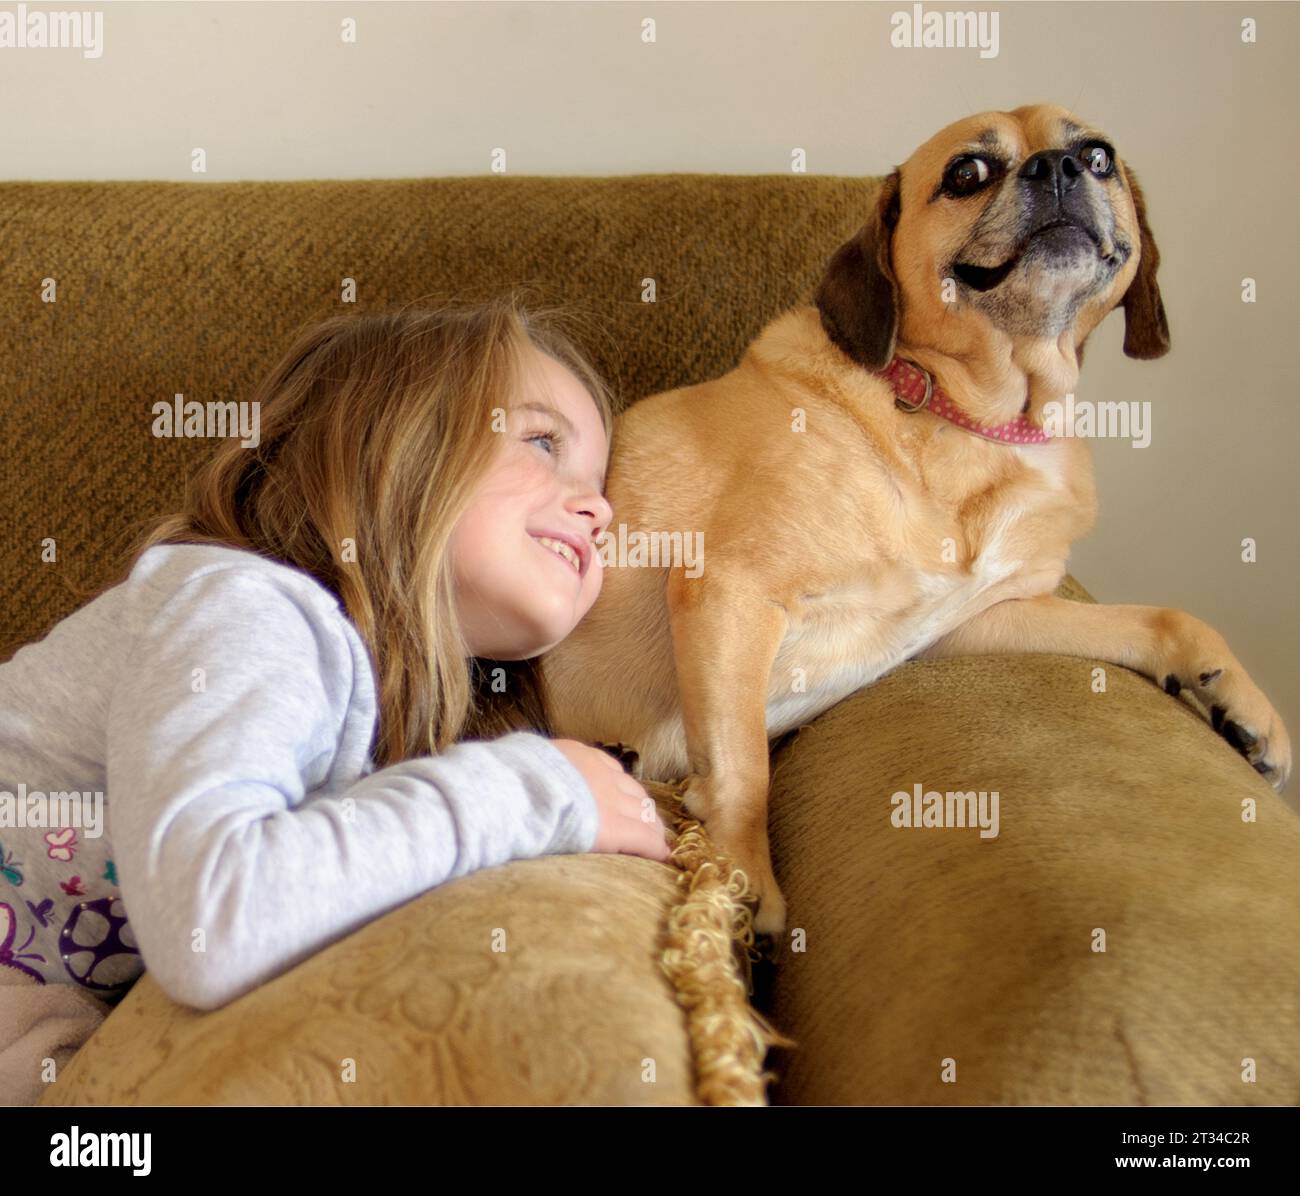 Little girl smiling with Puggle dog on couch Stock Photo